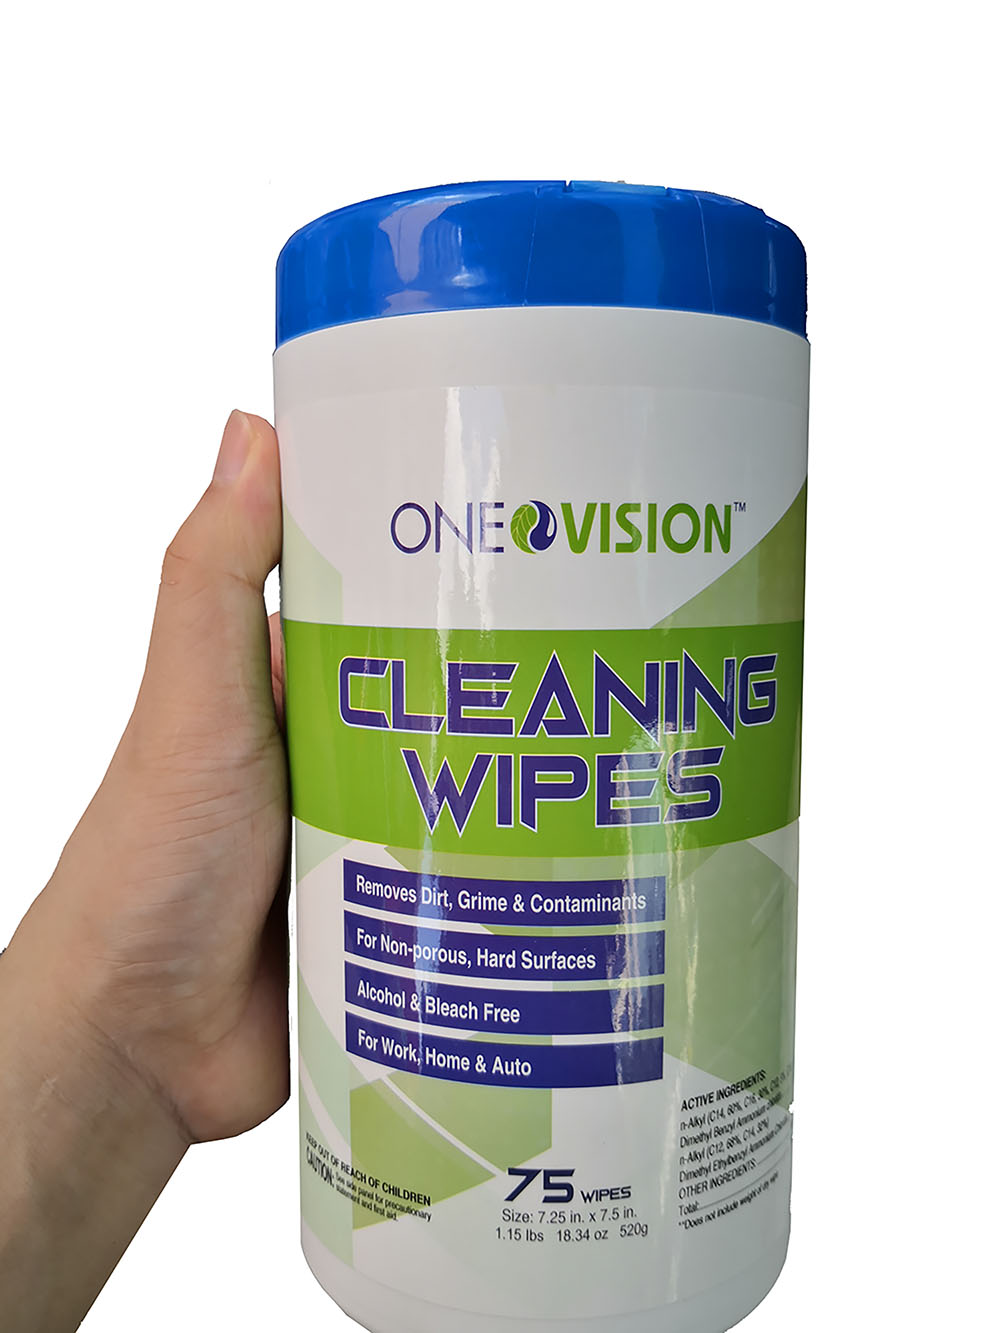 Raise Price of disinfecting wipes in 2022